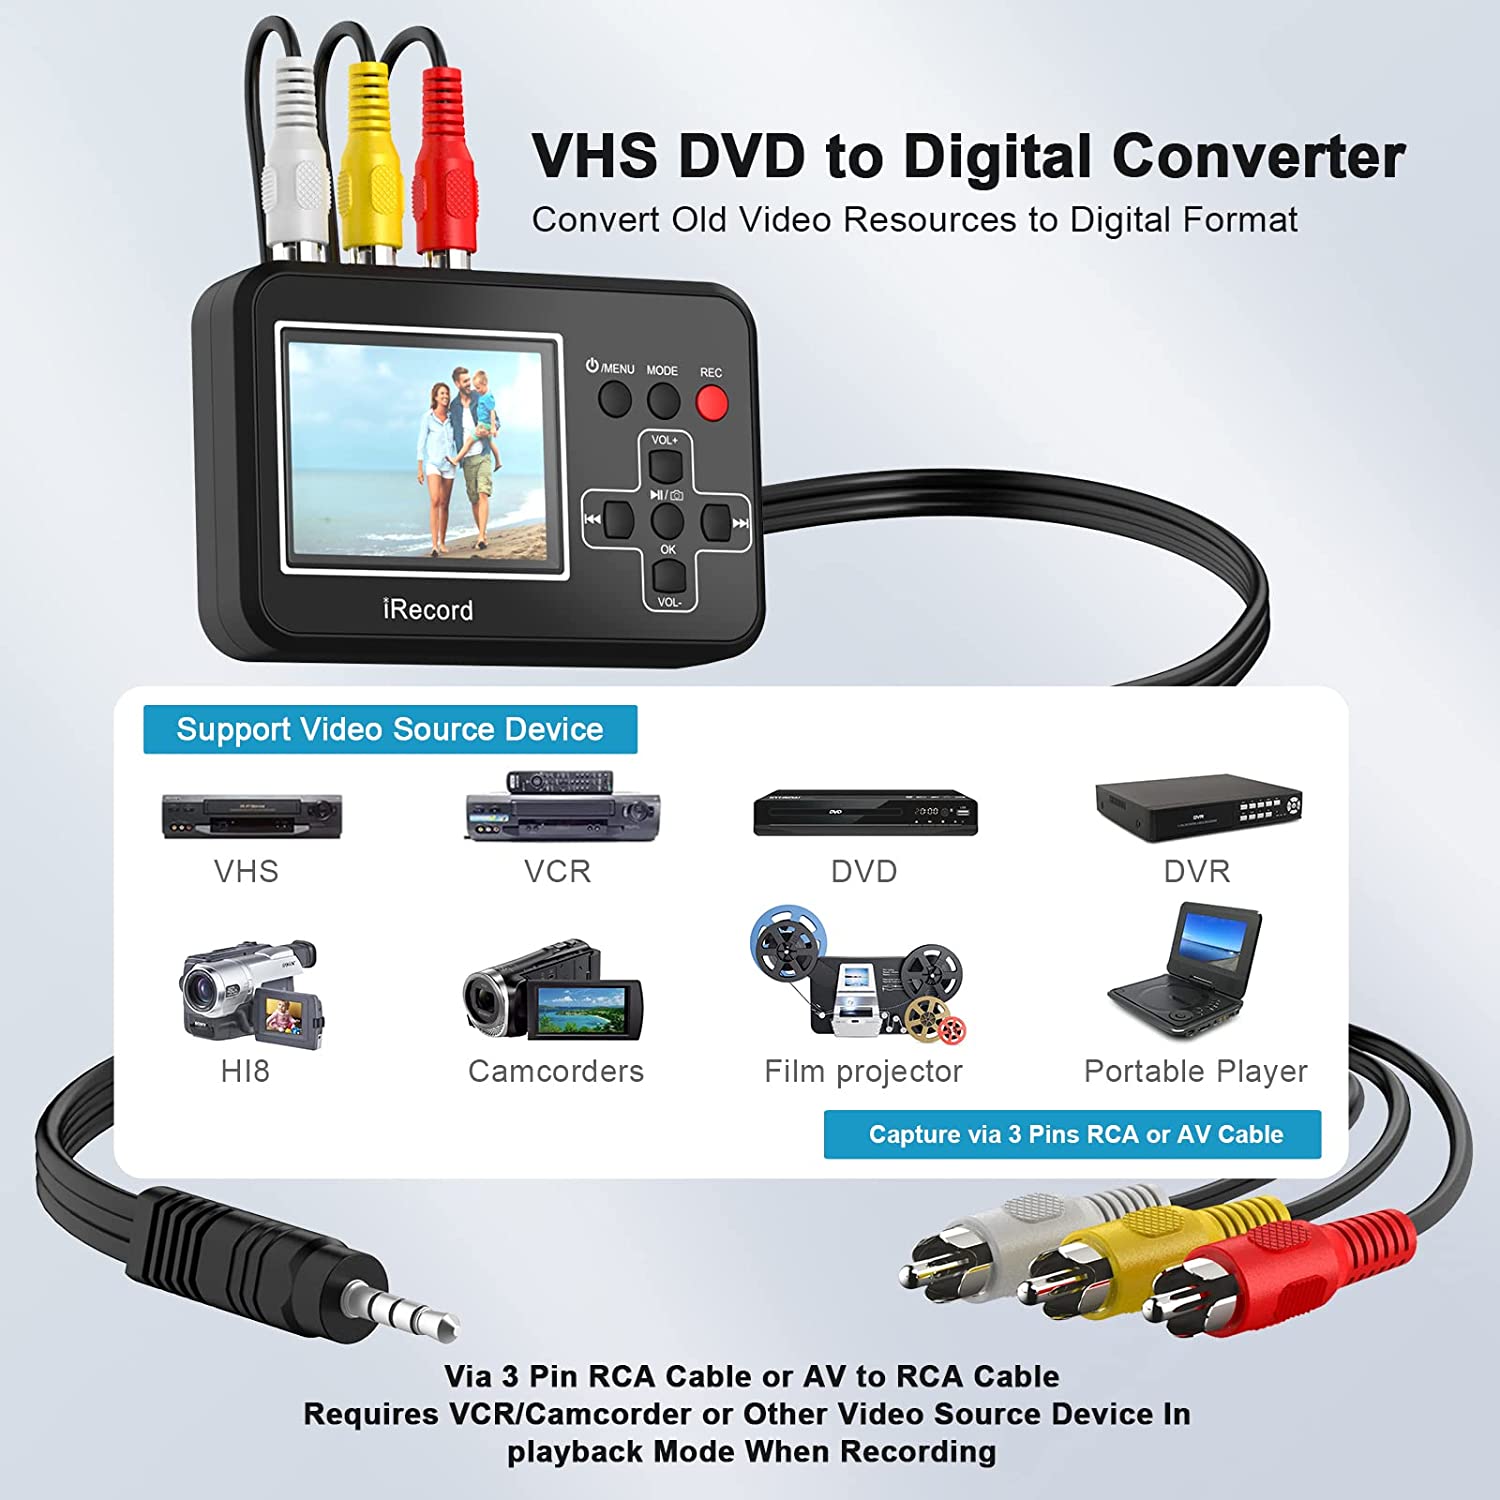 Video Converter Video to Digital Converter, VHS to Digital Converter to Capture Video from VCR, VHS Tapes, Hi8, DVD, TV Box and Gaming Systems - image 3 of 9